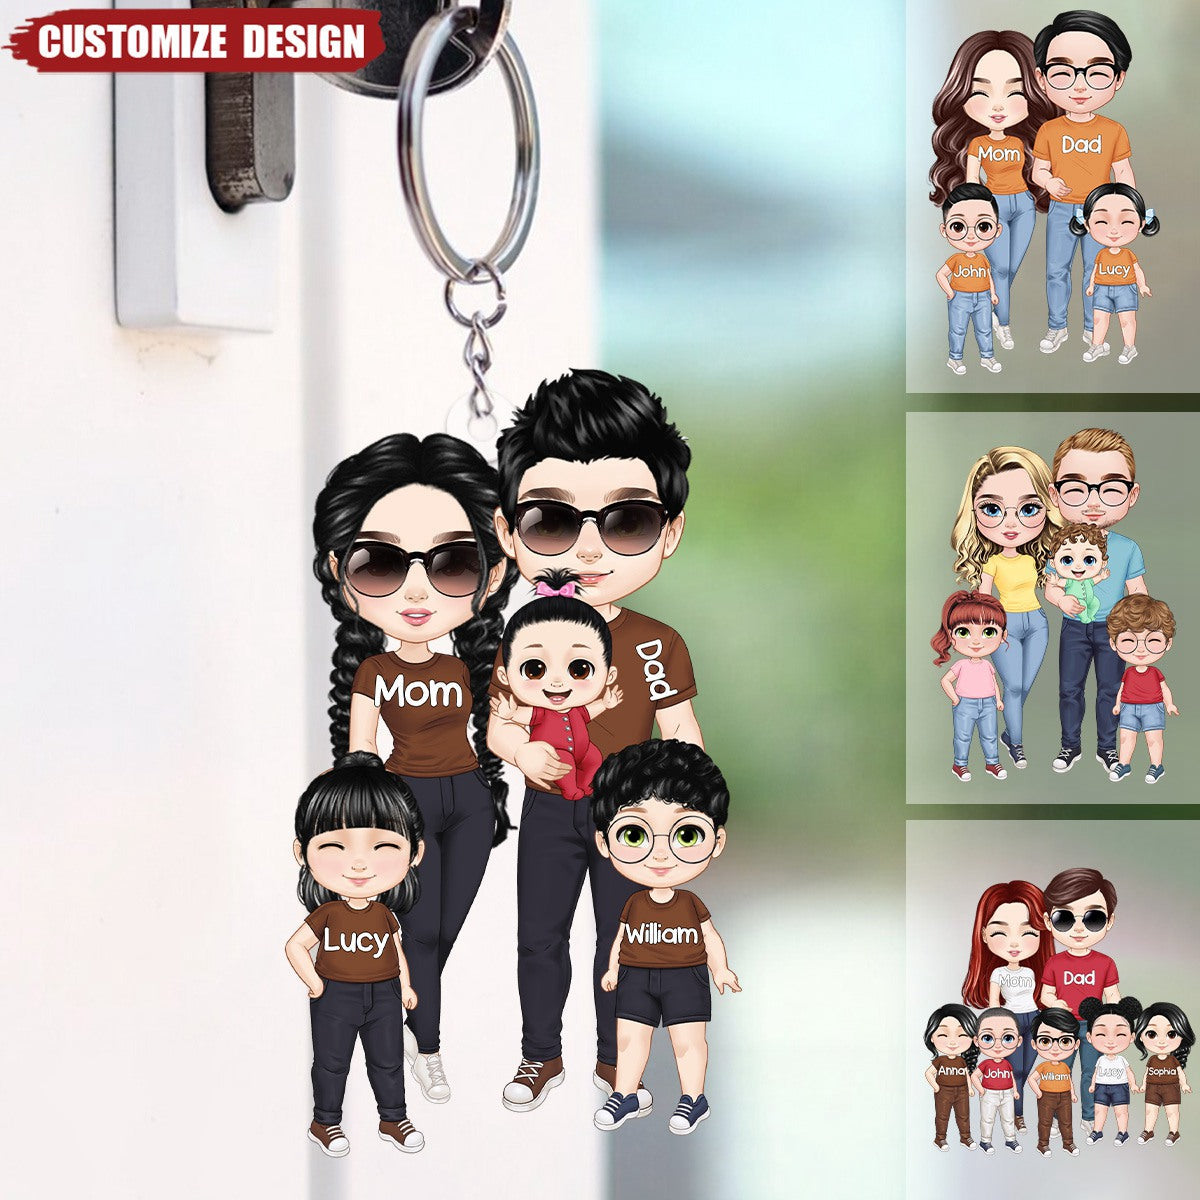 Doll Couple With Kids Personalized Acrylic Keychain - Gift For Family